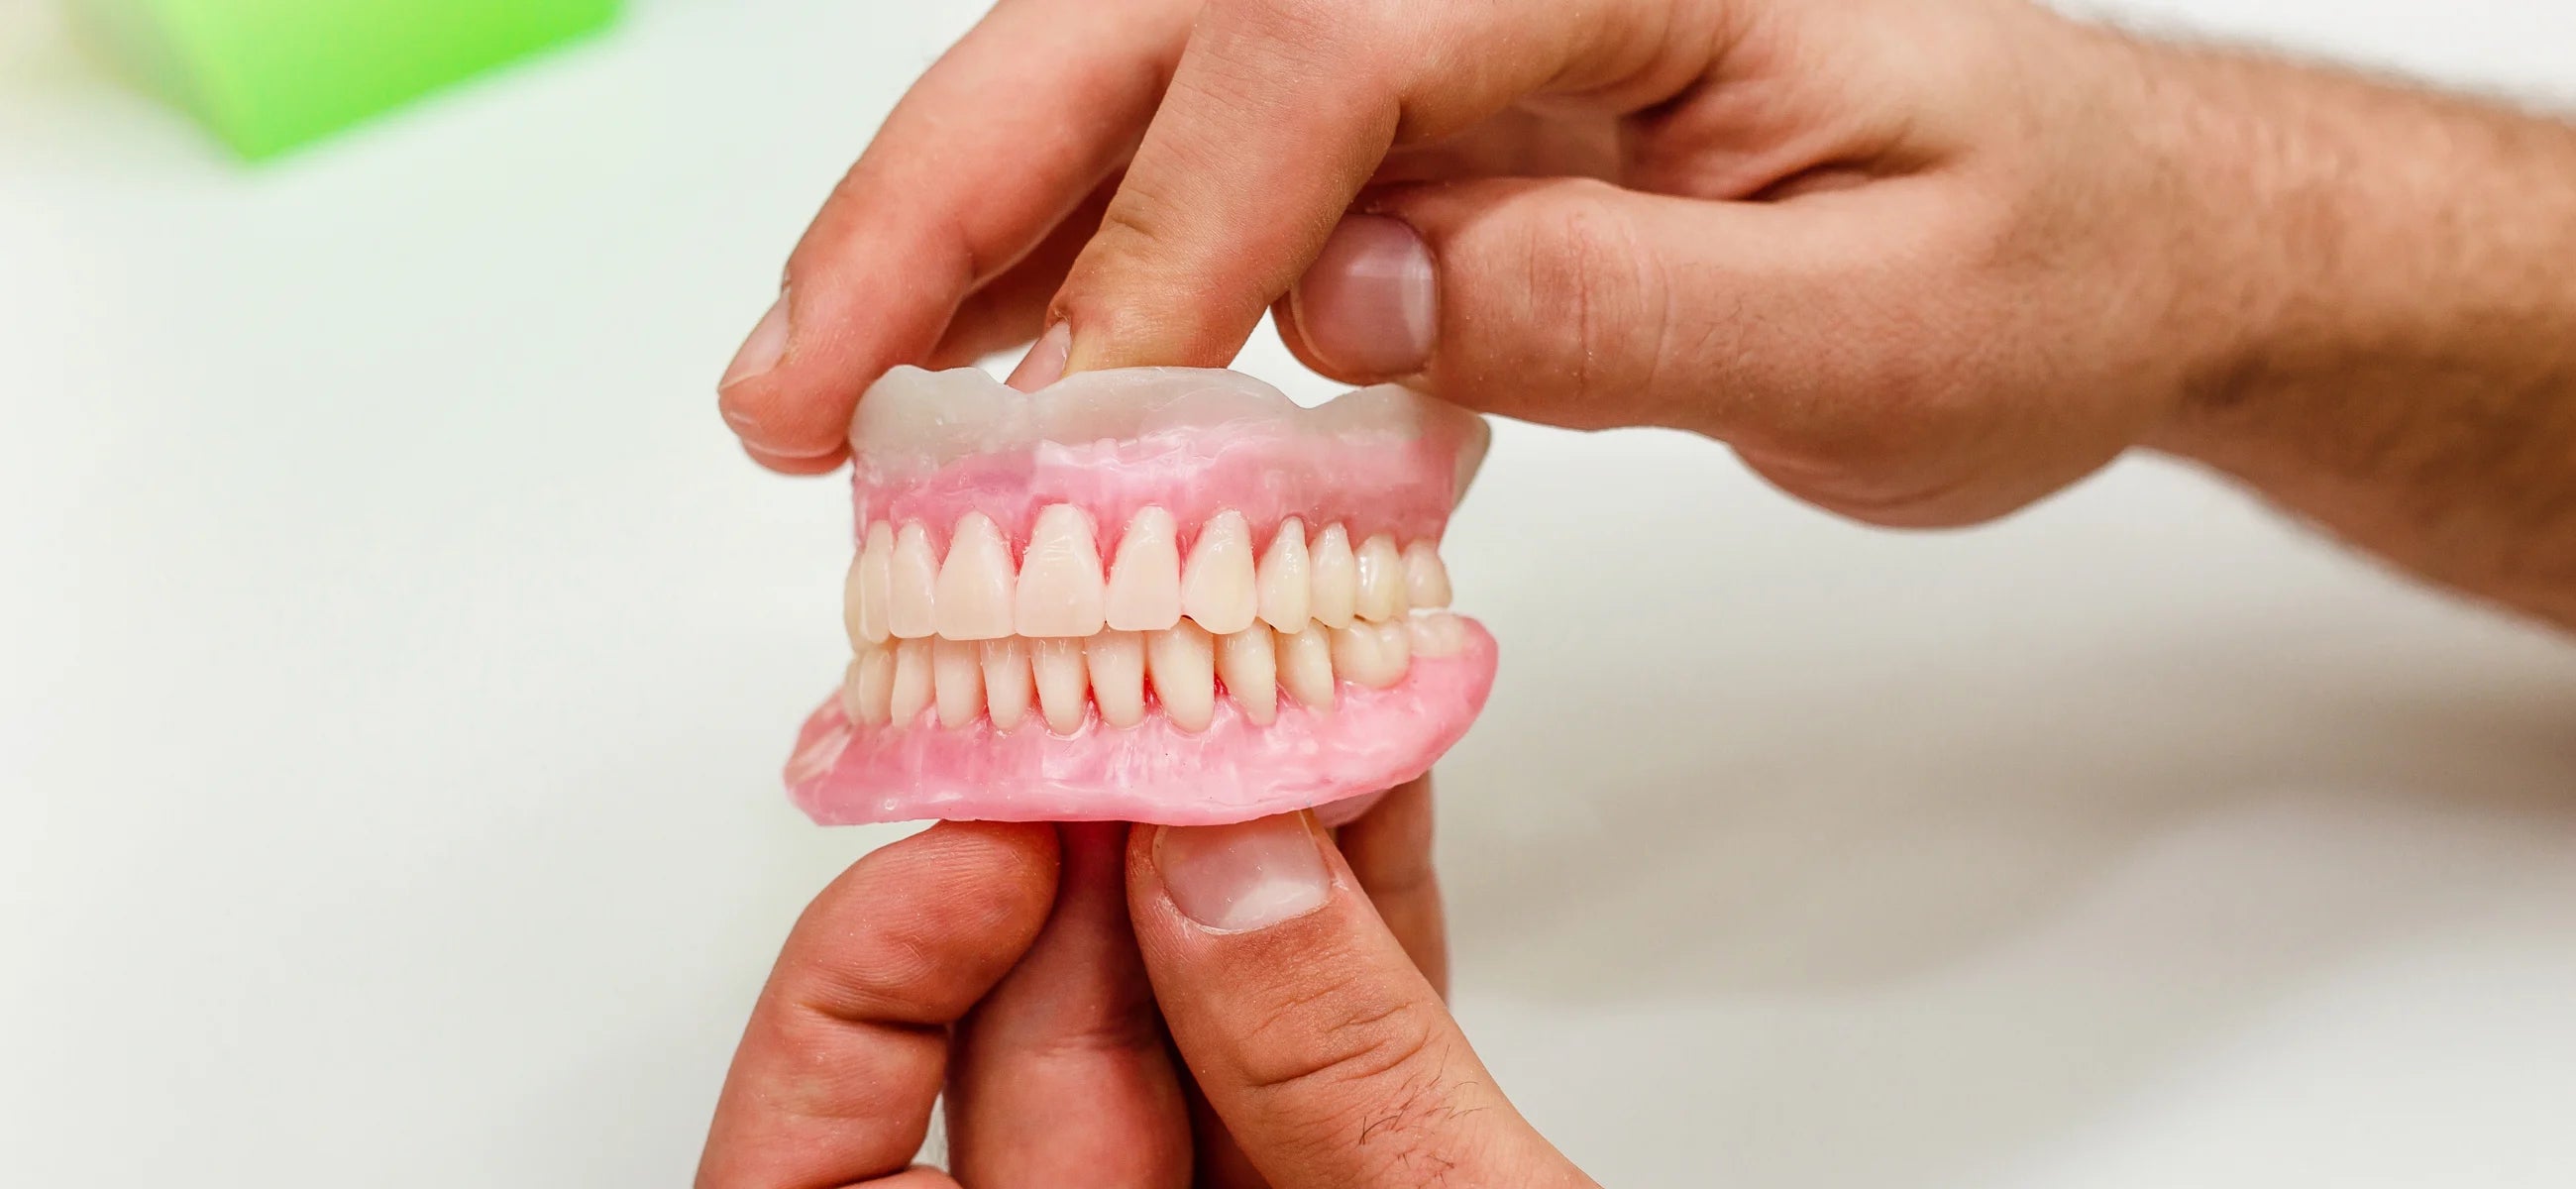 How to properly remove denture adhesive from your mouth